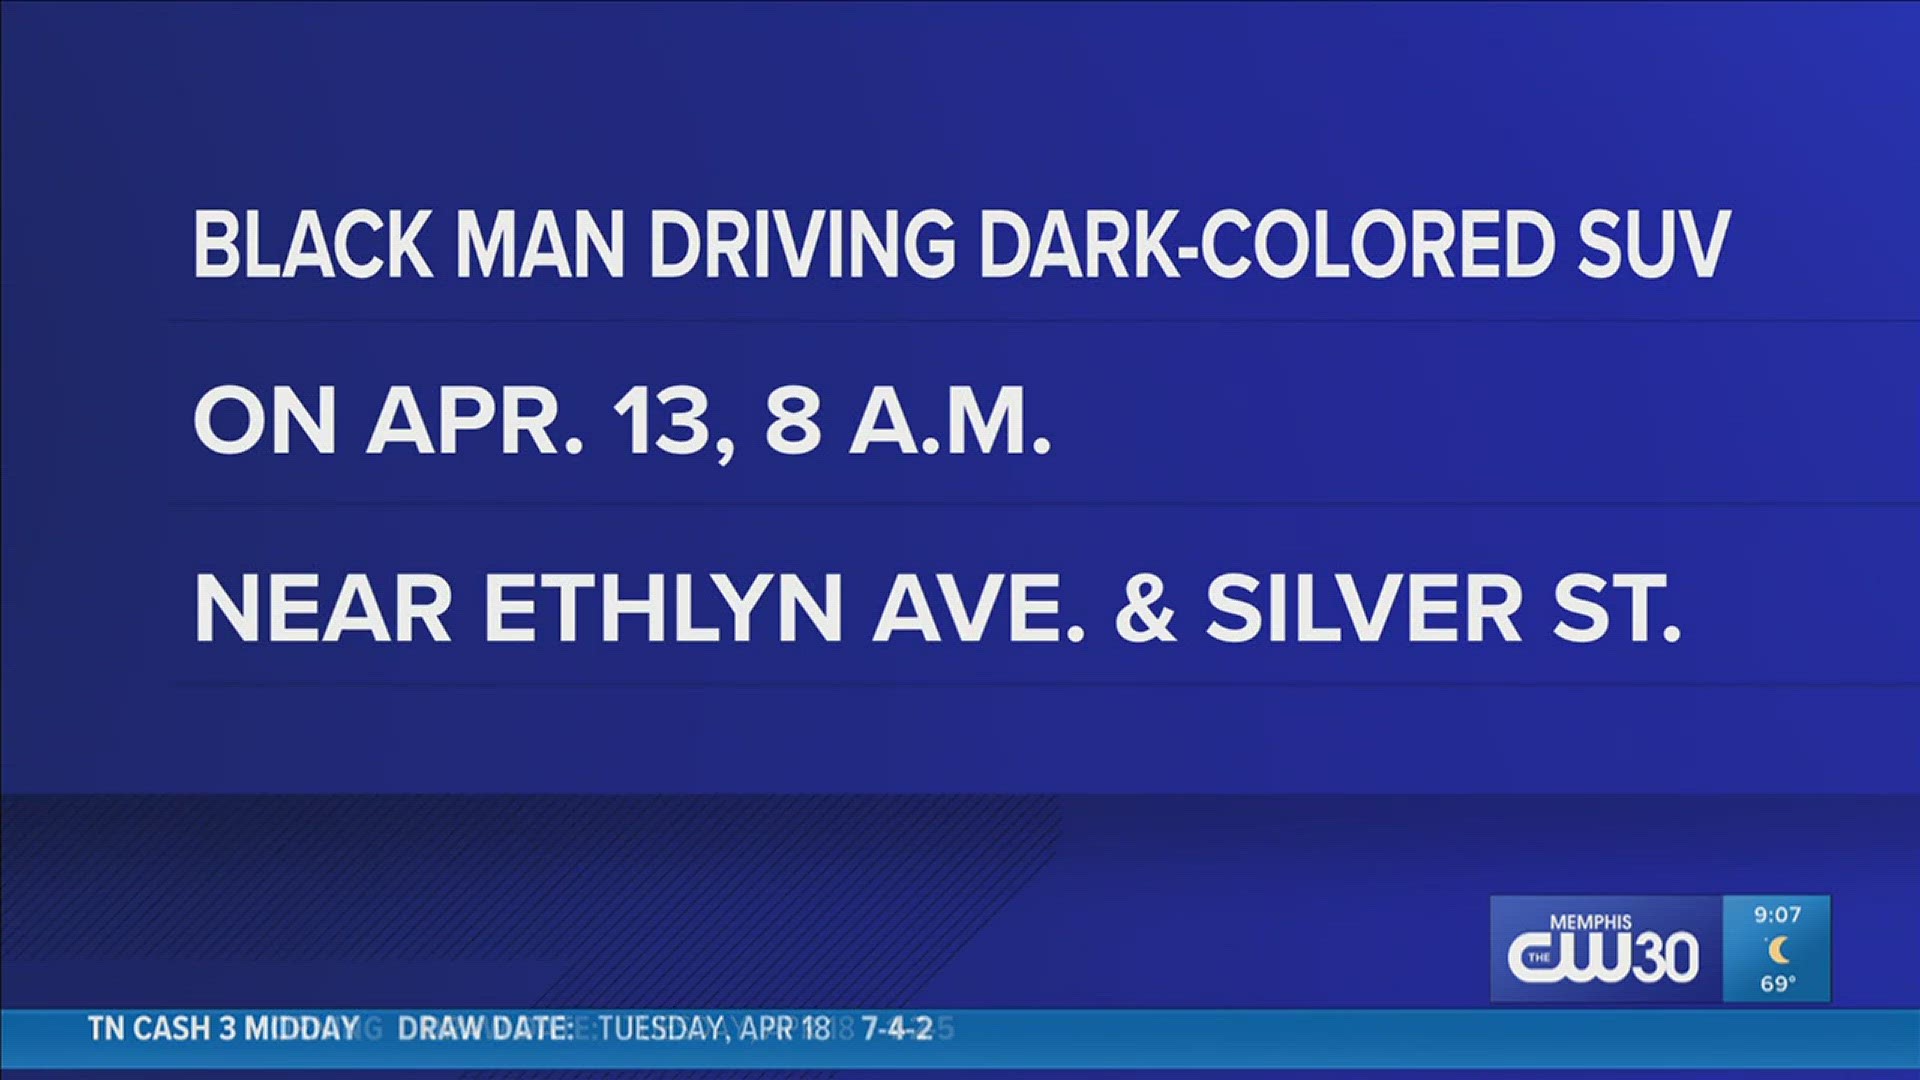 Thursday, April 13, a Black male abducted a girl in a dark-colored mid-size SUV near Ethlyn Ave. and Silver St.